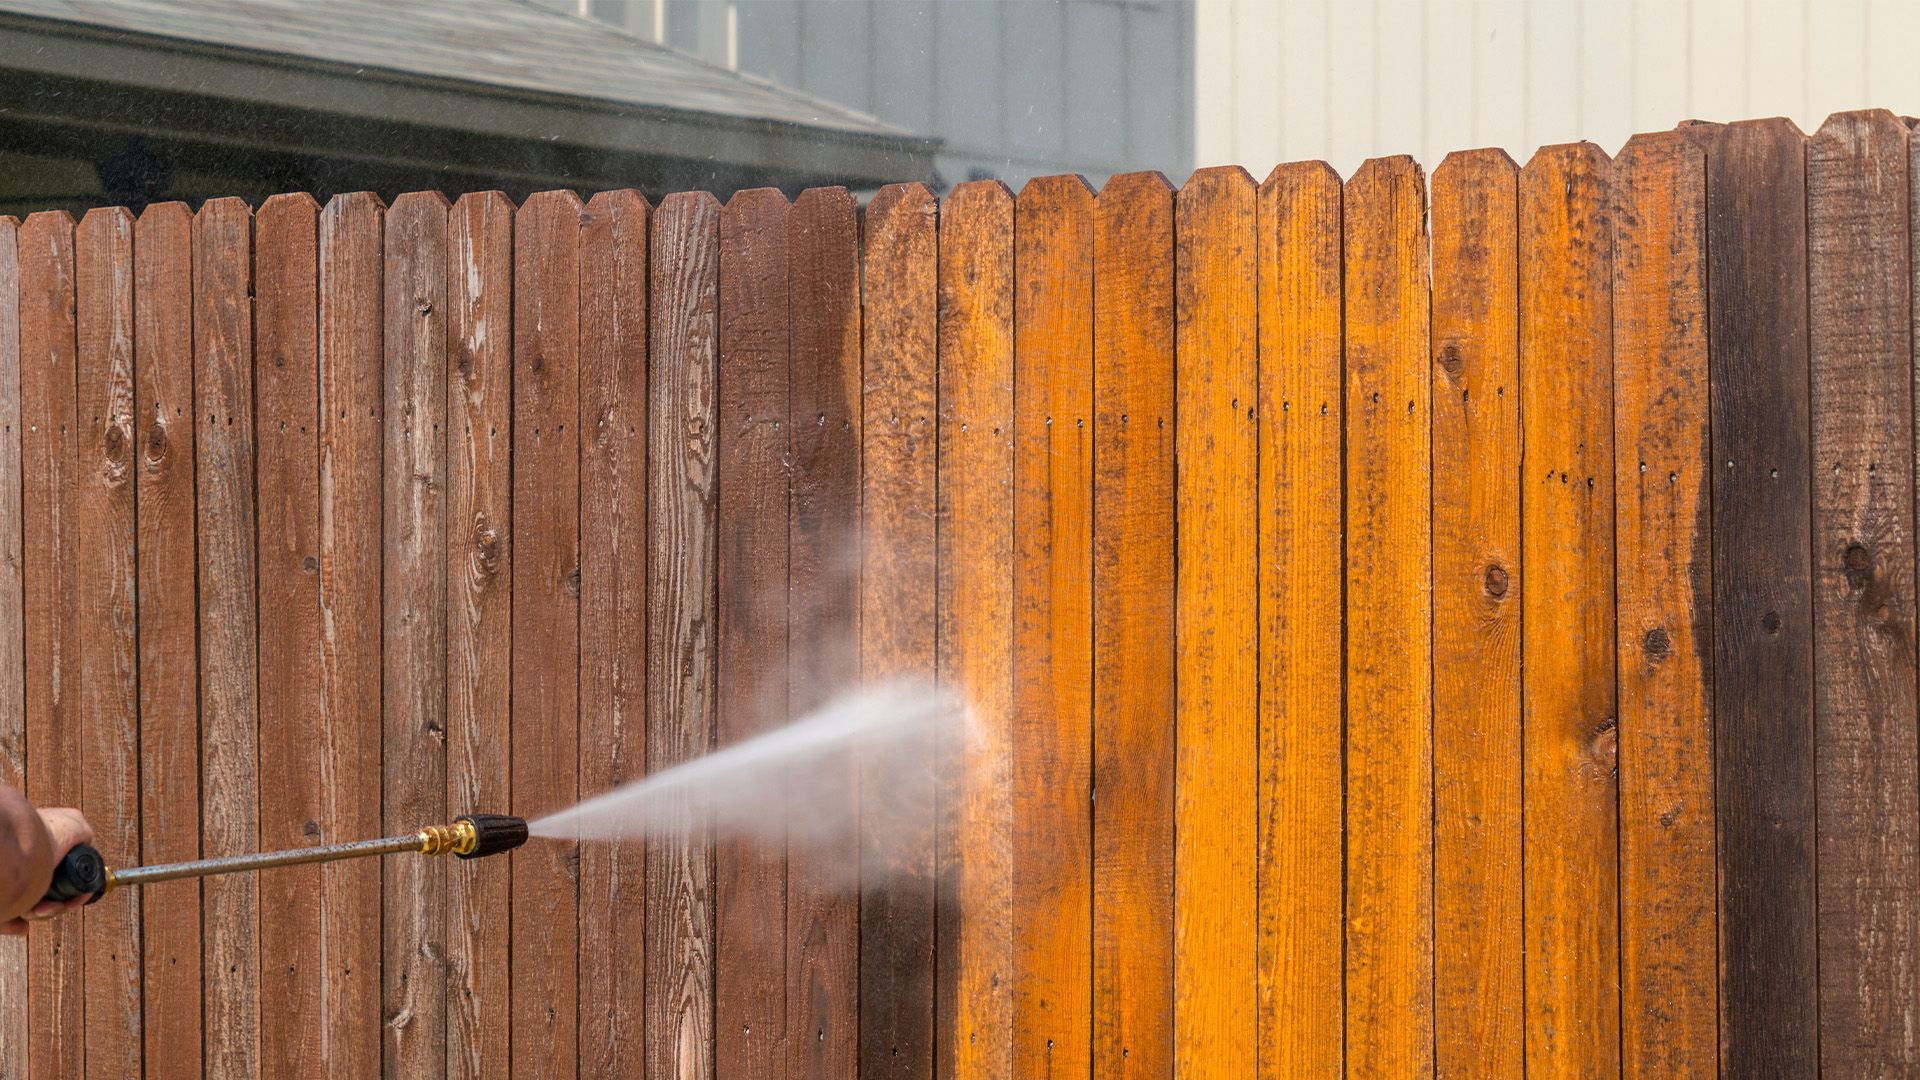 cleaning fence using pressure washer